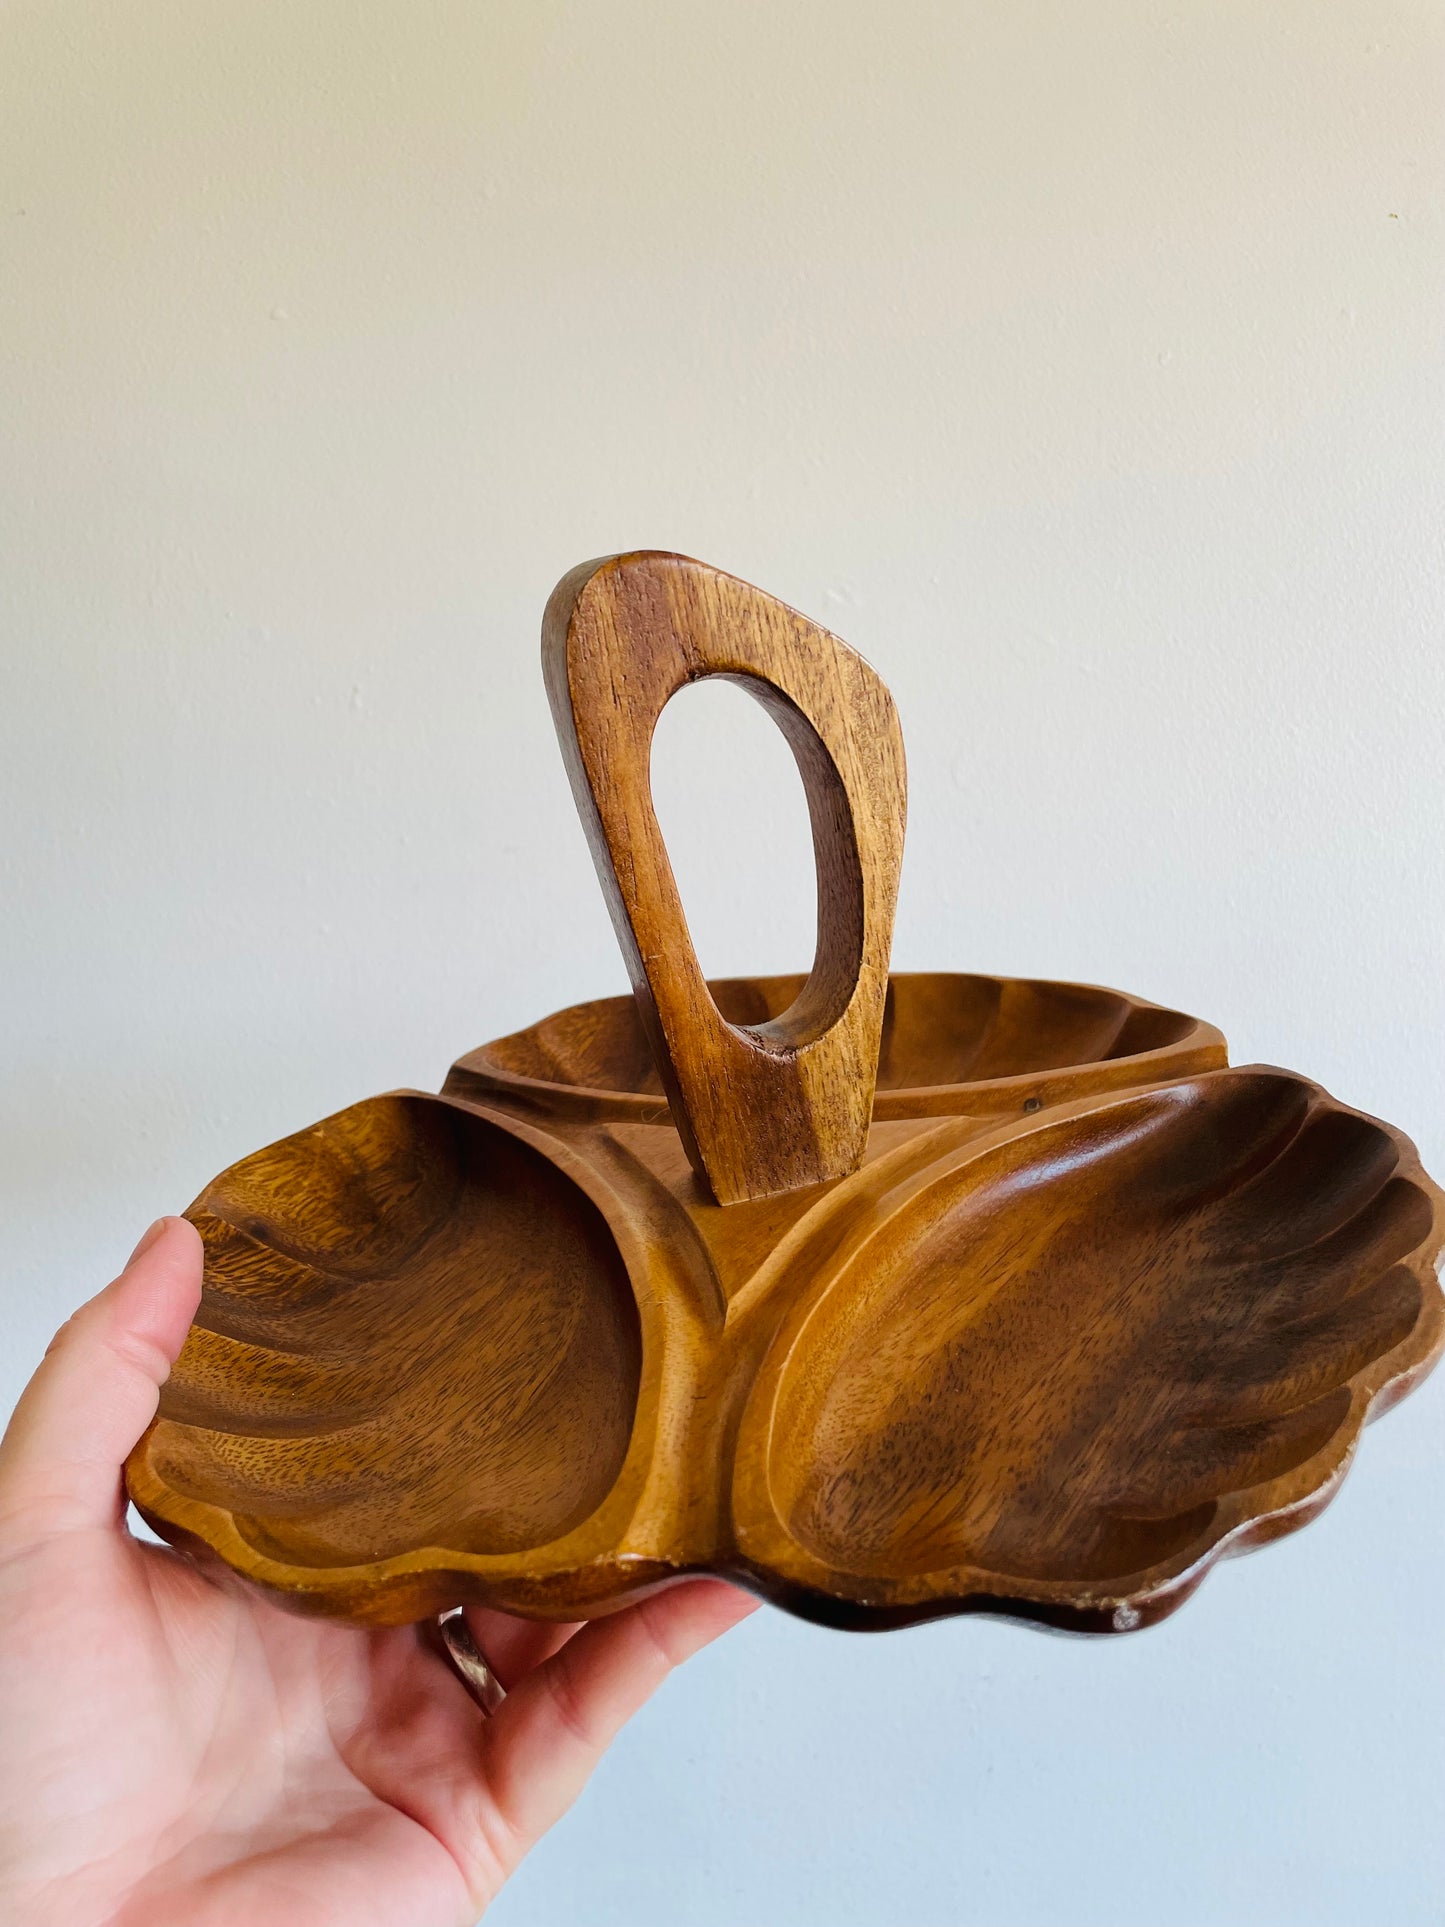 Monkey Pod Wood Divided Tray with Handle - Catchall, Serving, Jewellery, Trinkets, Etc.!